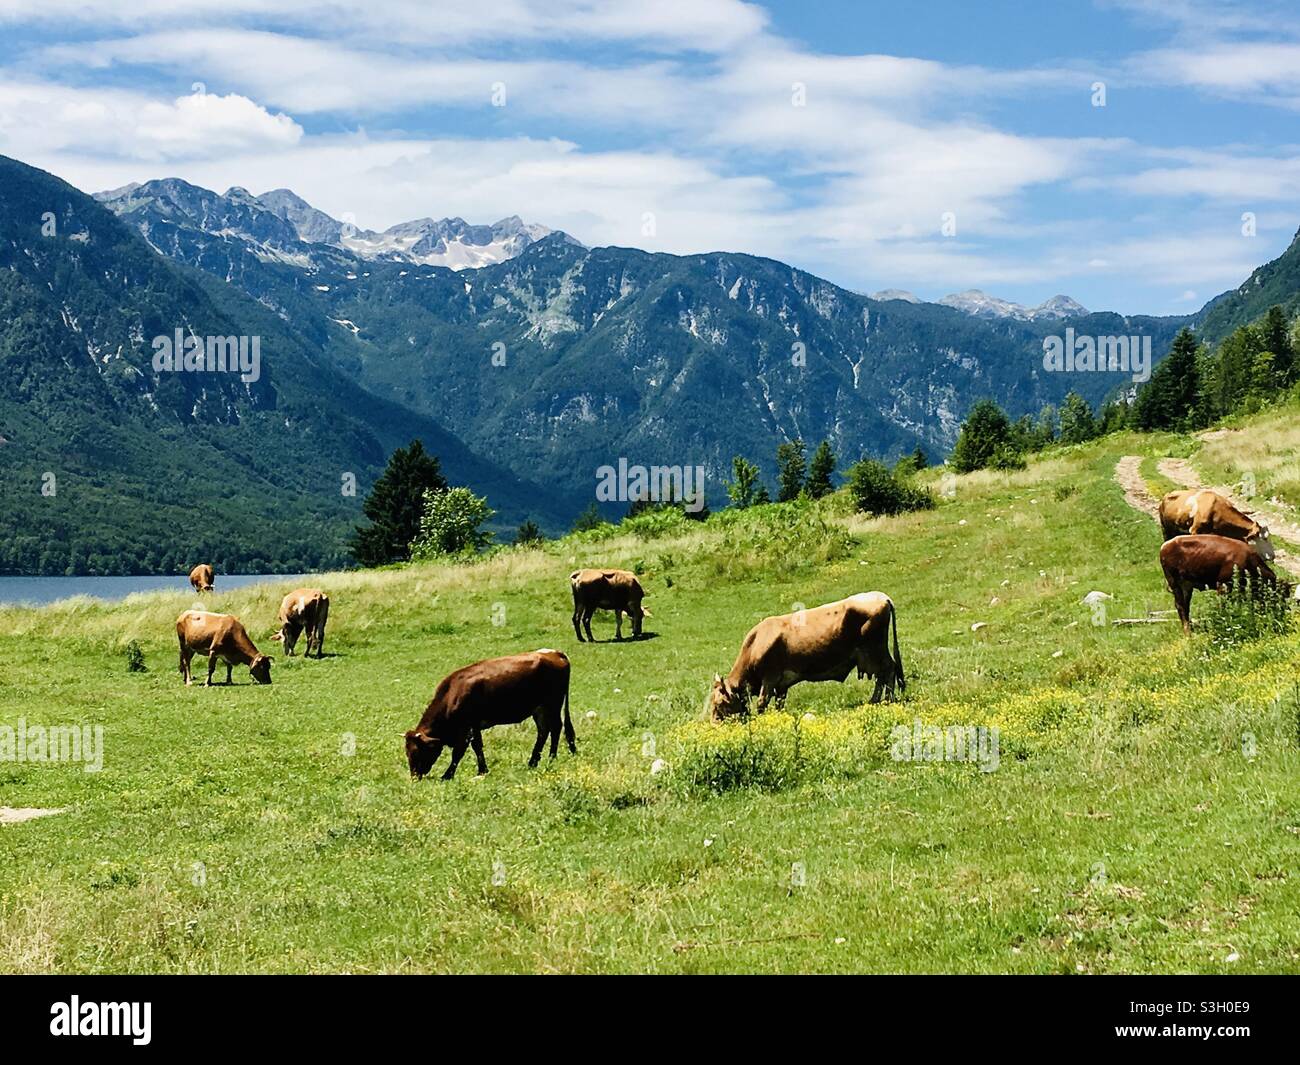 Cows on an alpine meadow with mountains in the background Stock Photo